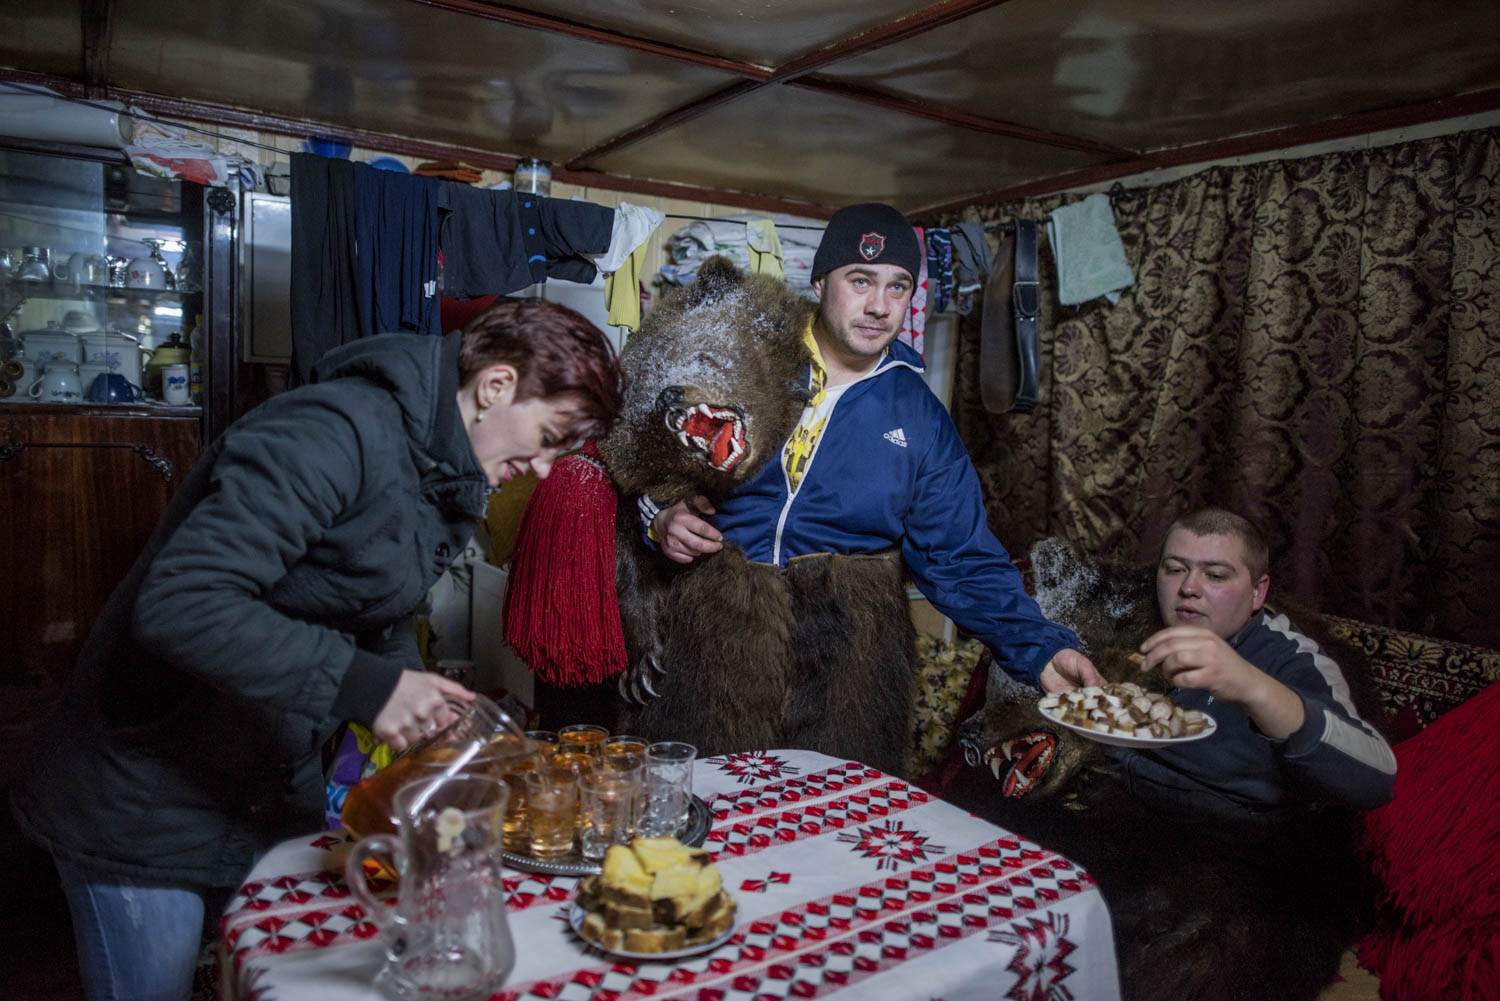  Cătălin Apetroaie, a bear in Toalaca's troupe, serves his fellow bears cubes pig fat, while his wife fills up glasses of homemade palinka liquor. The troupe has just finished performing at Apetroaie's home and is taking a rest before continuing to t